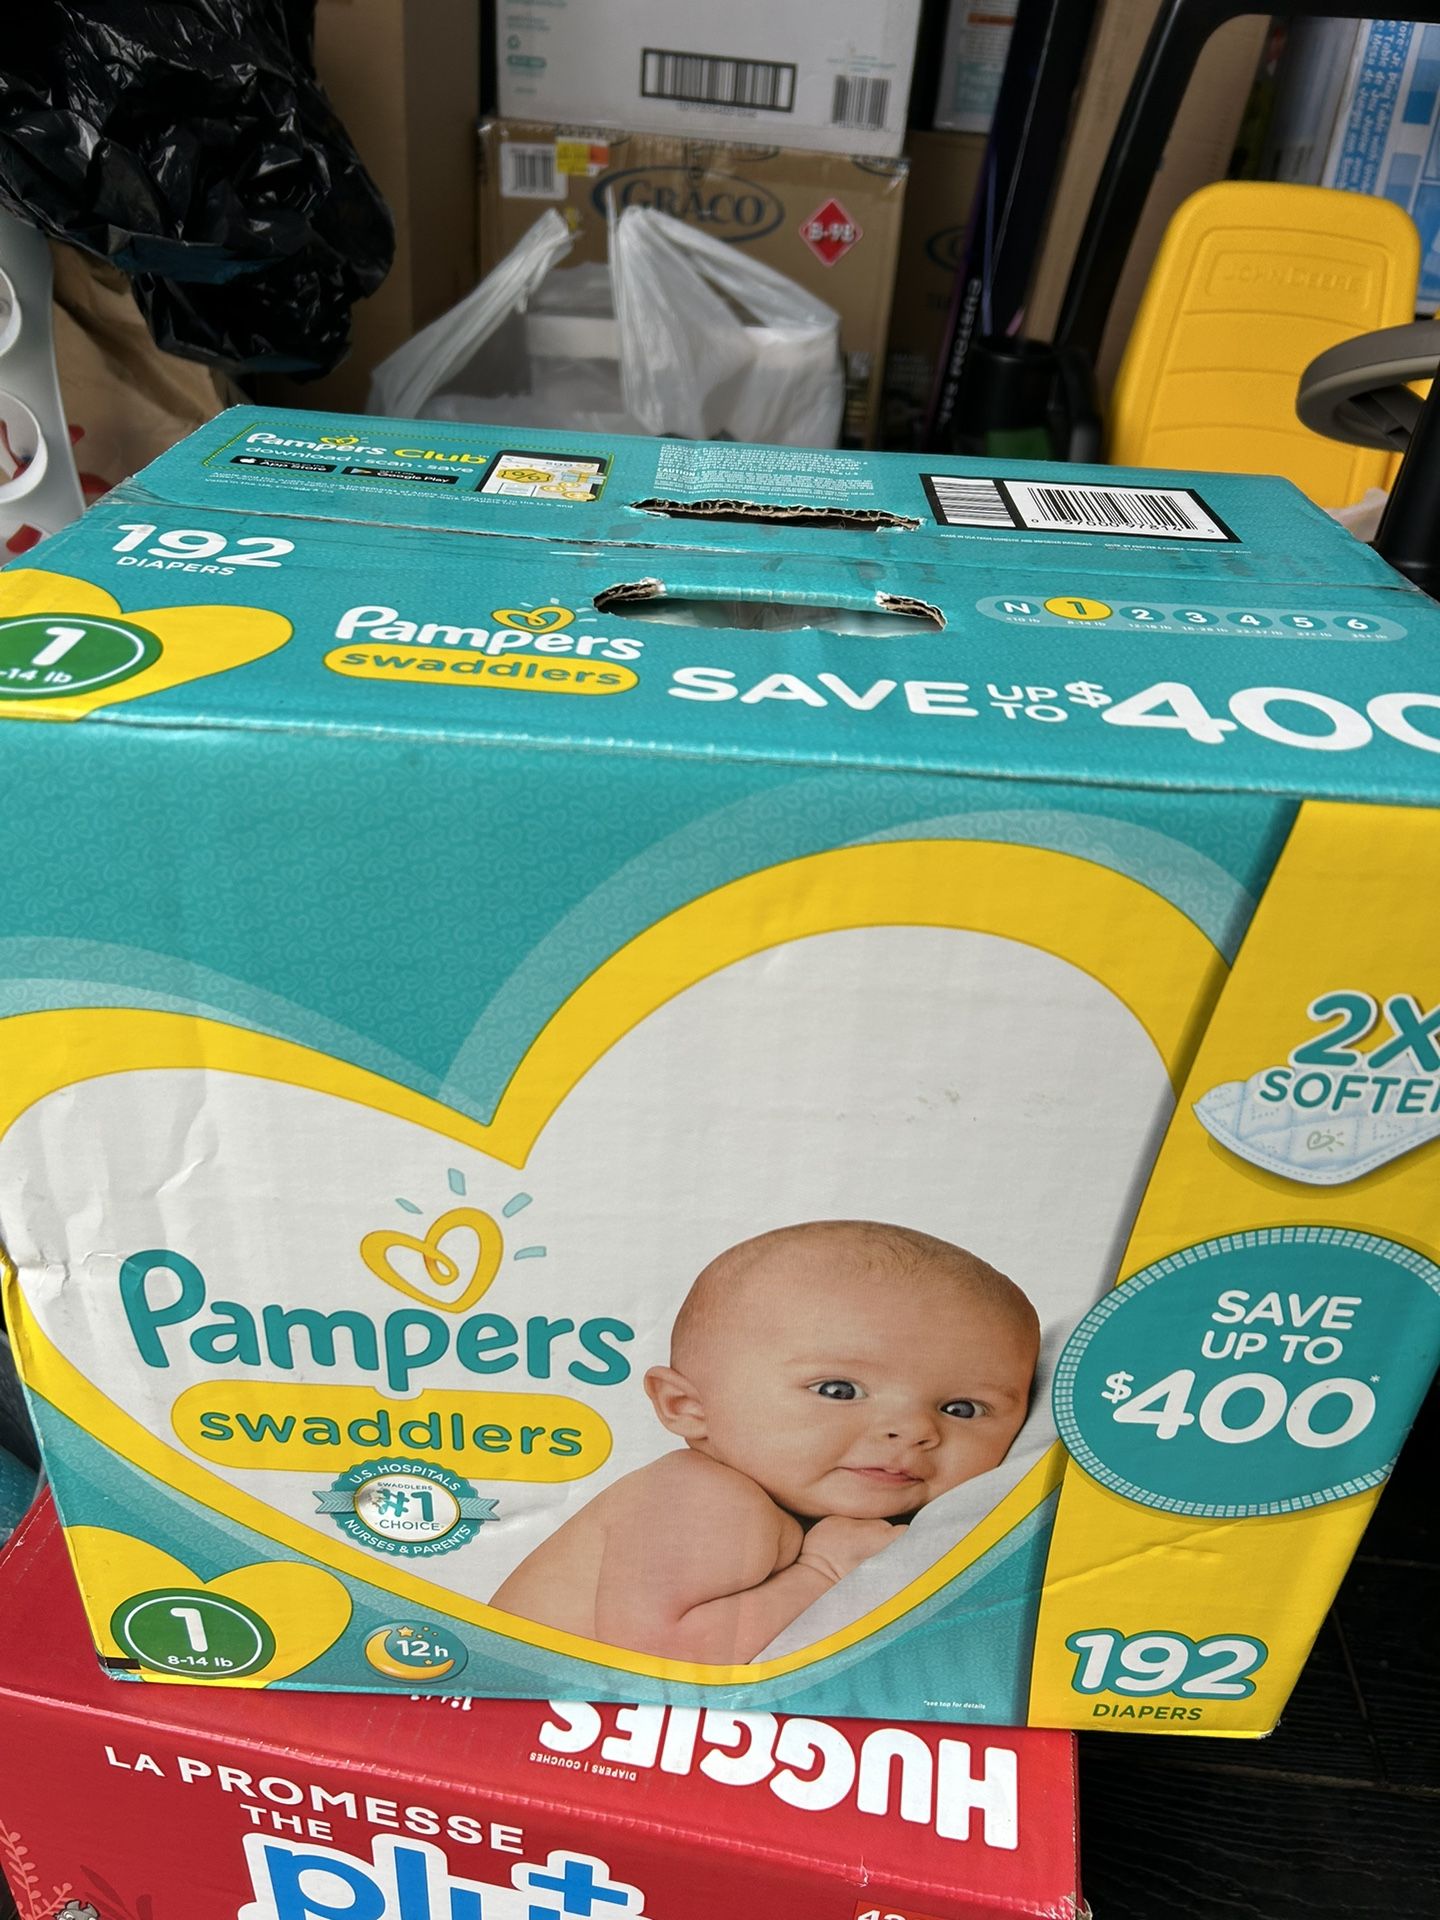 Brand New Pampers Diapers Size 1 192 Count